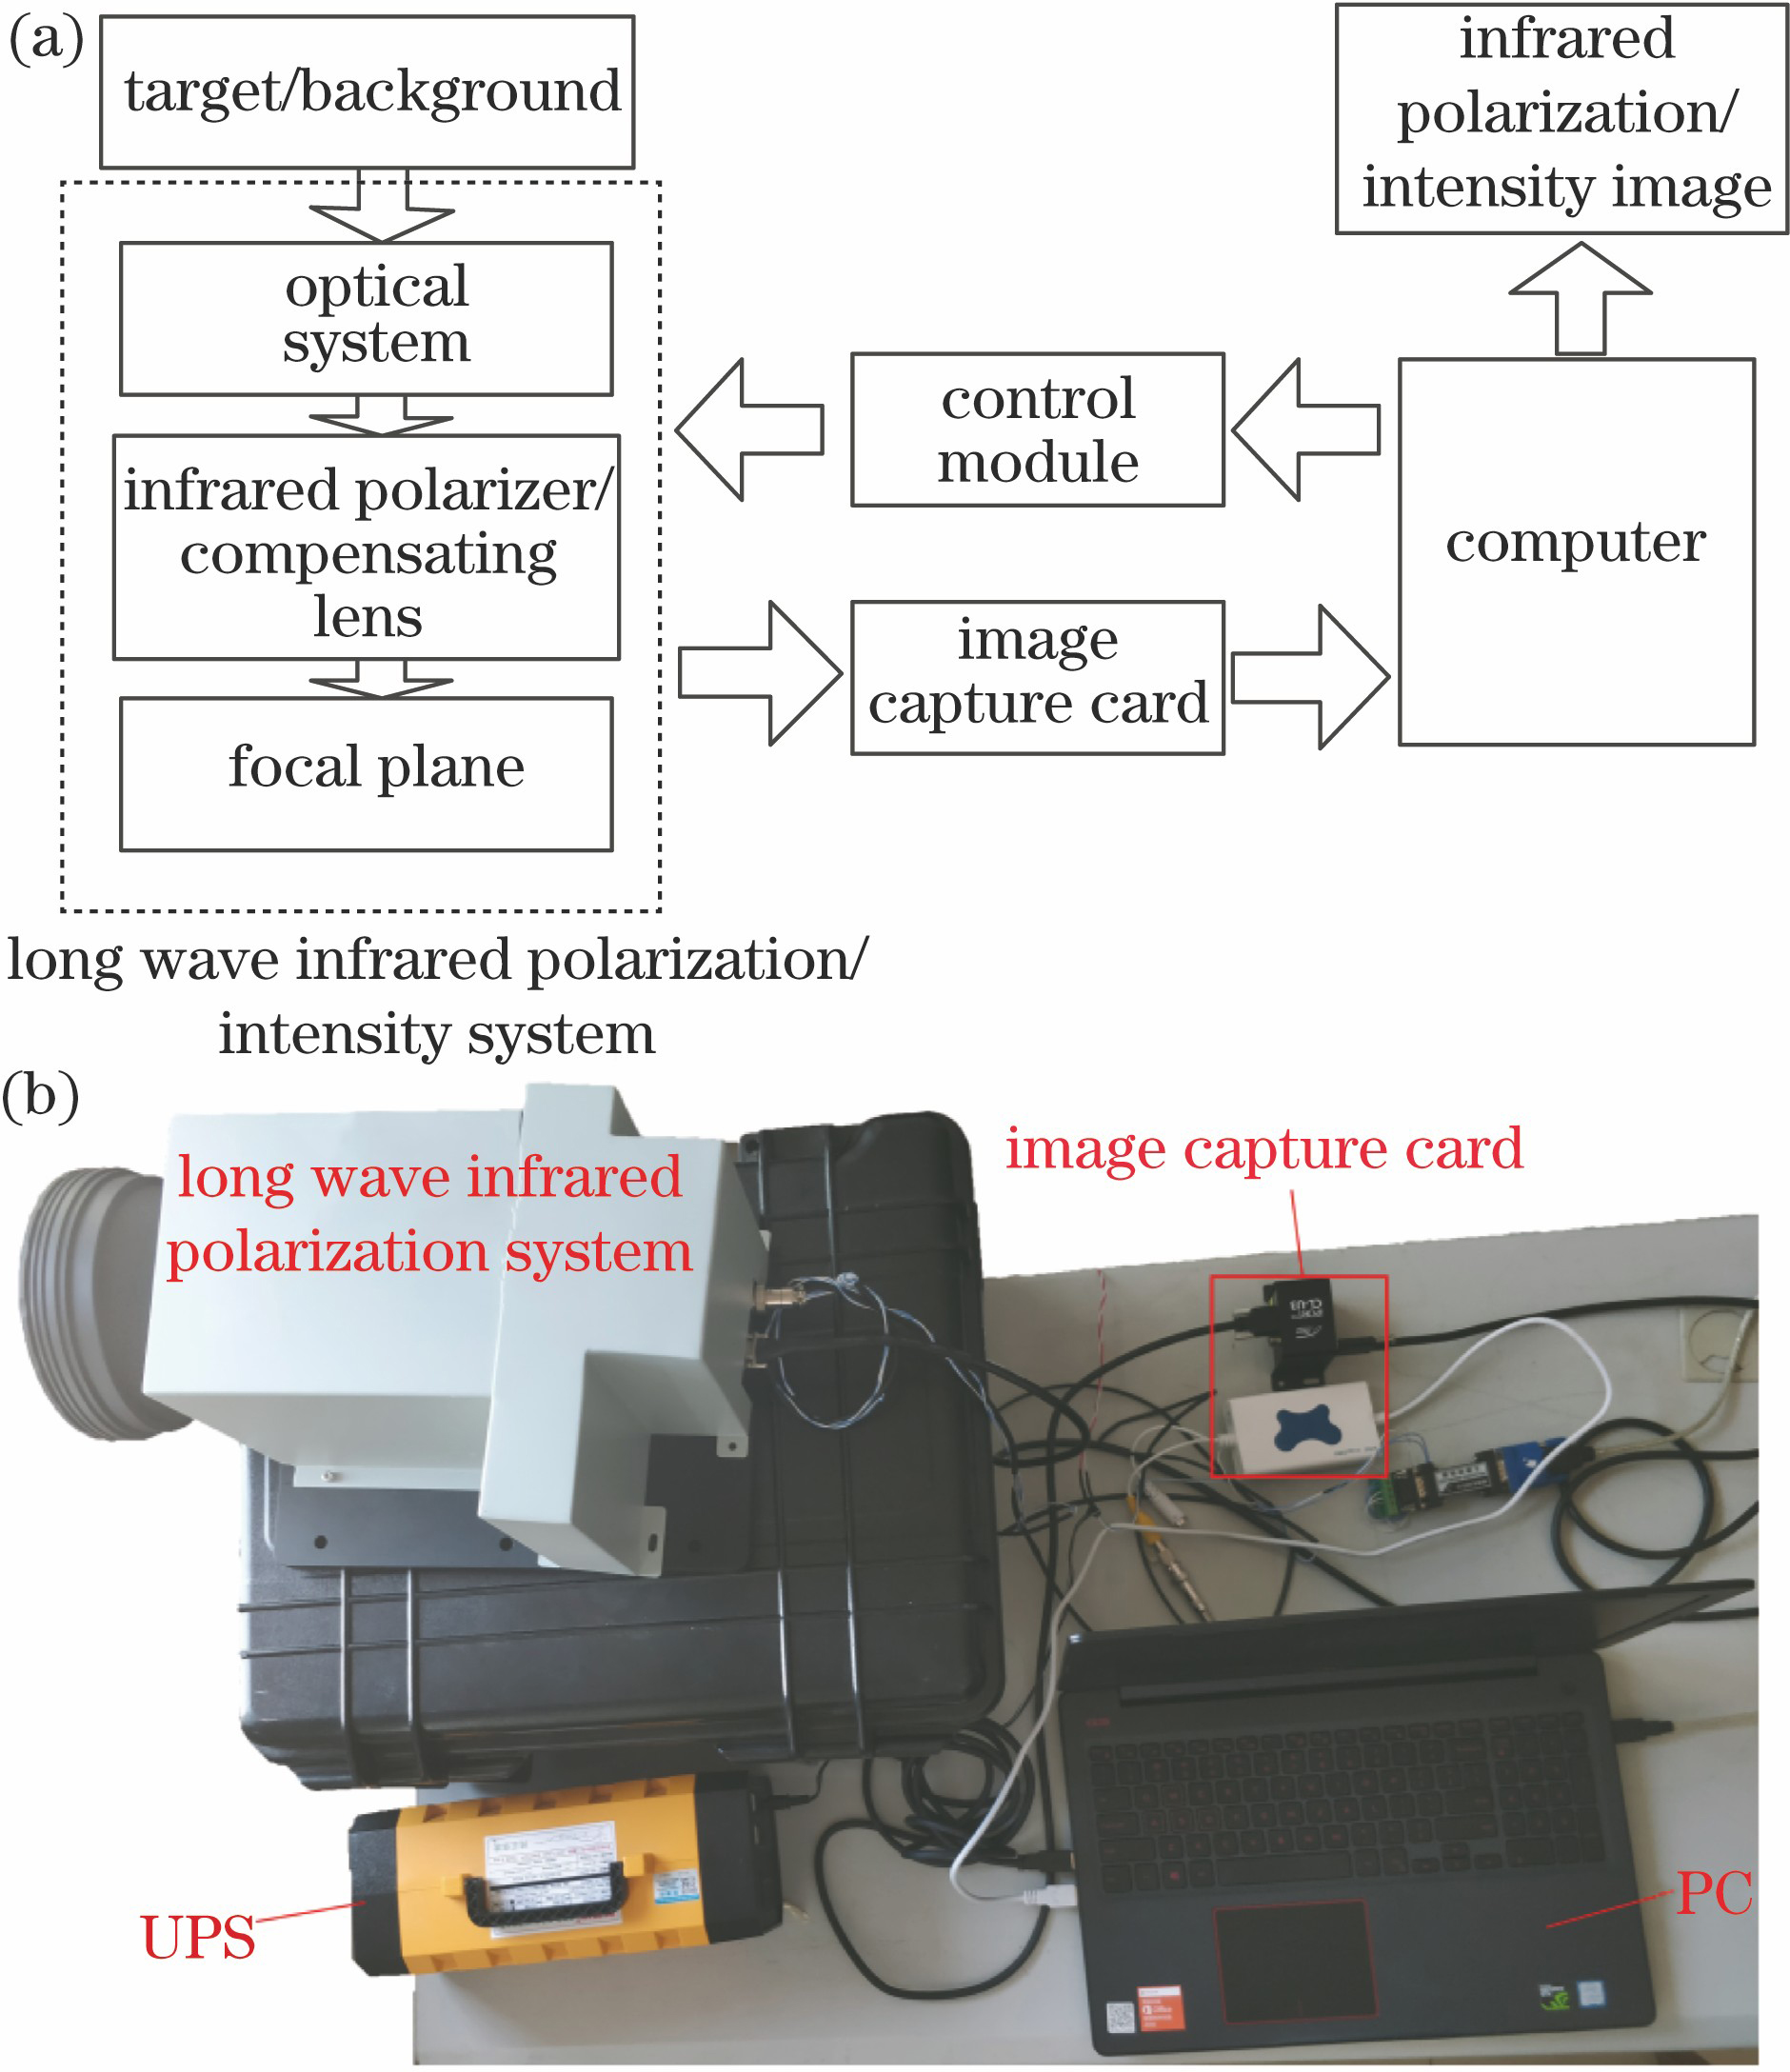 Infrared polarization/intensity image acquisition system. (a) Schematic diagram; (b) photo of system